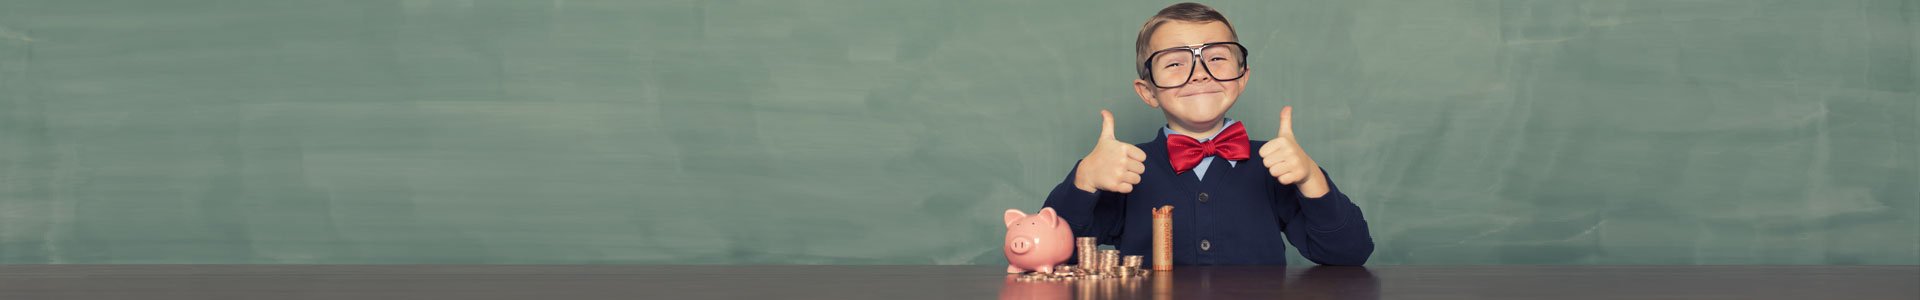 young boy smiling with piggy bank